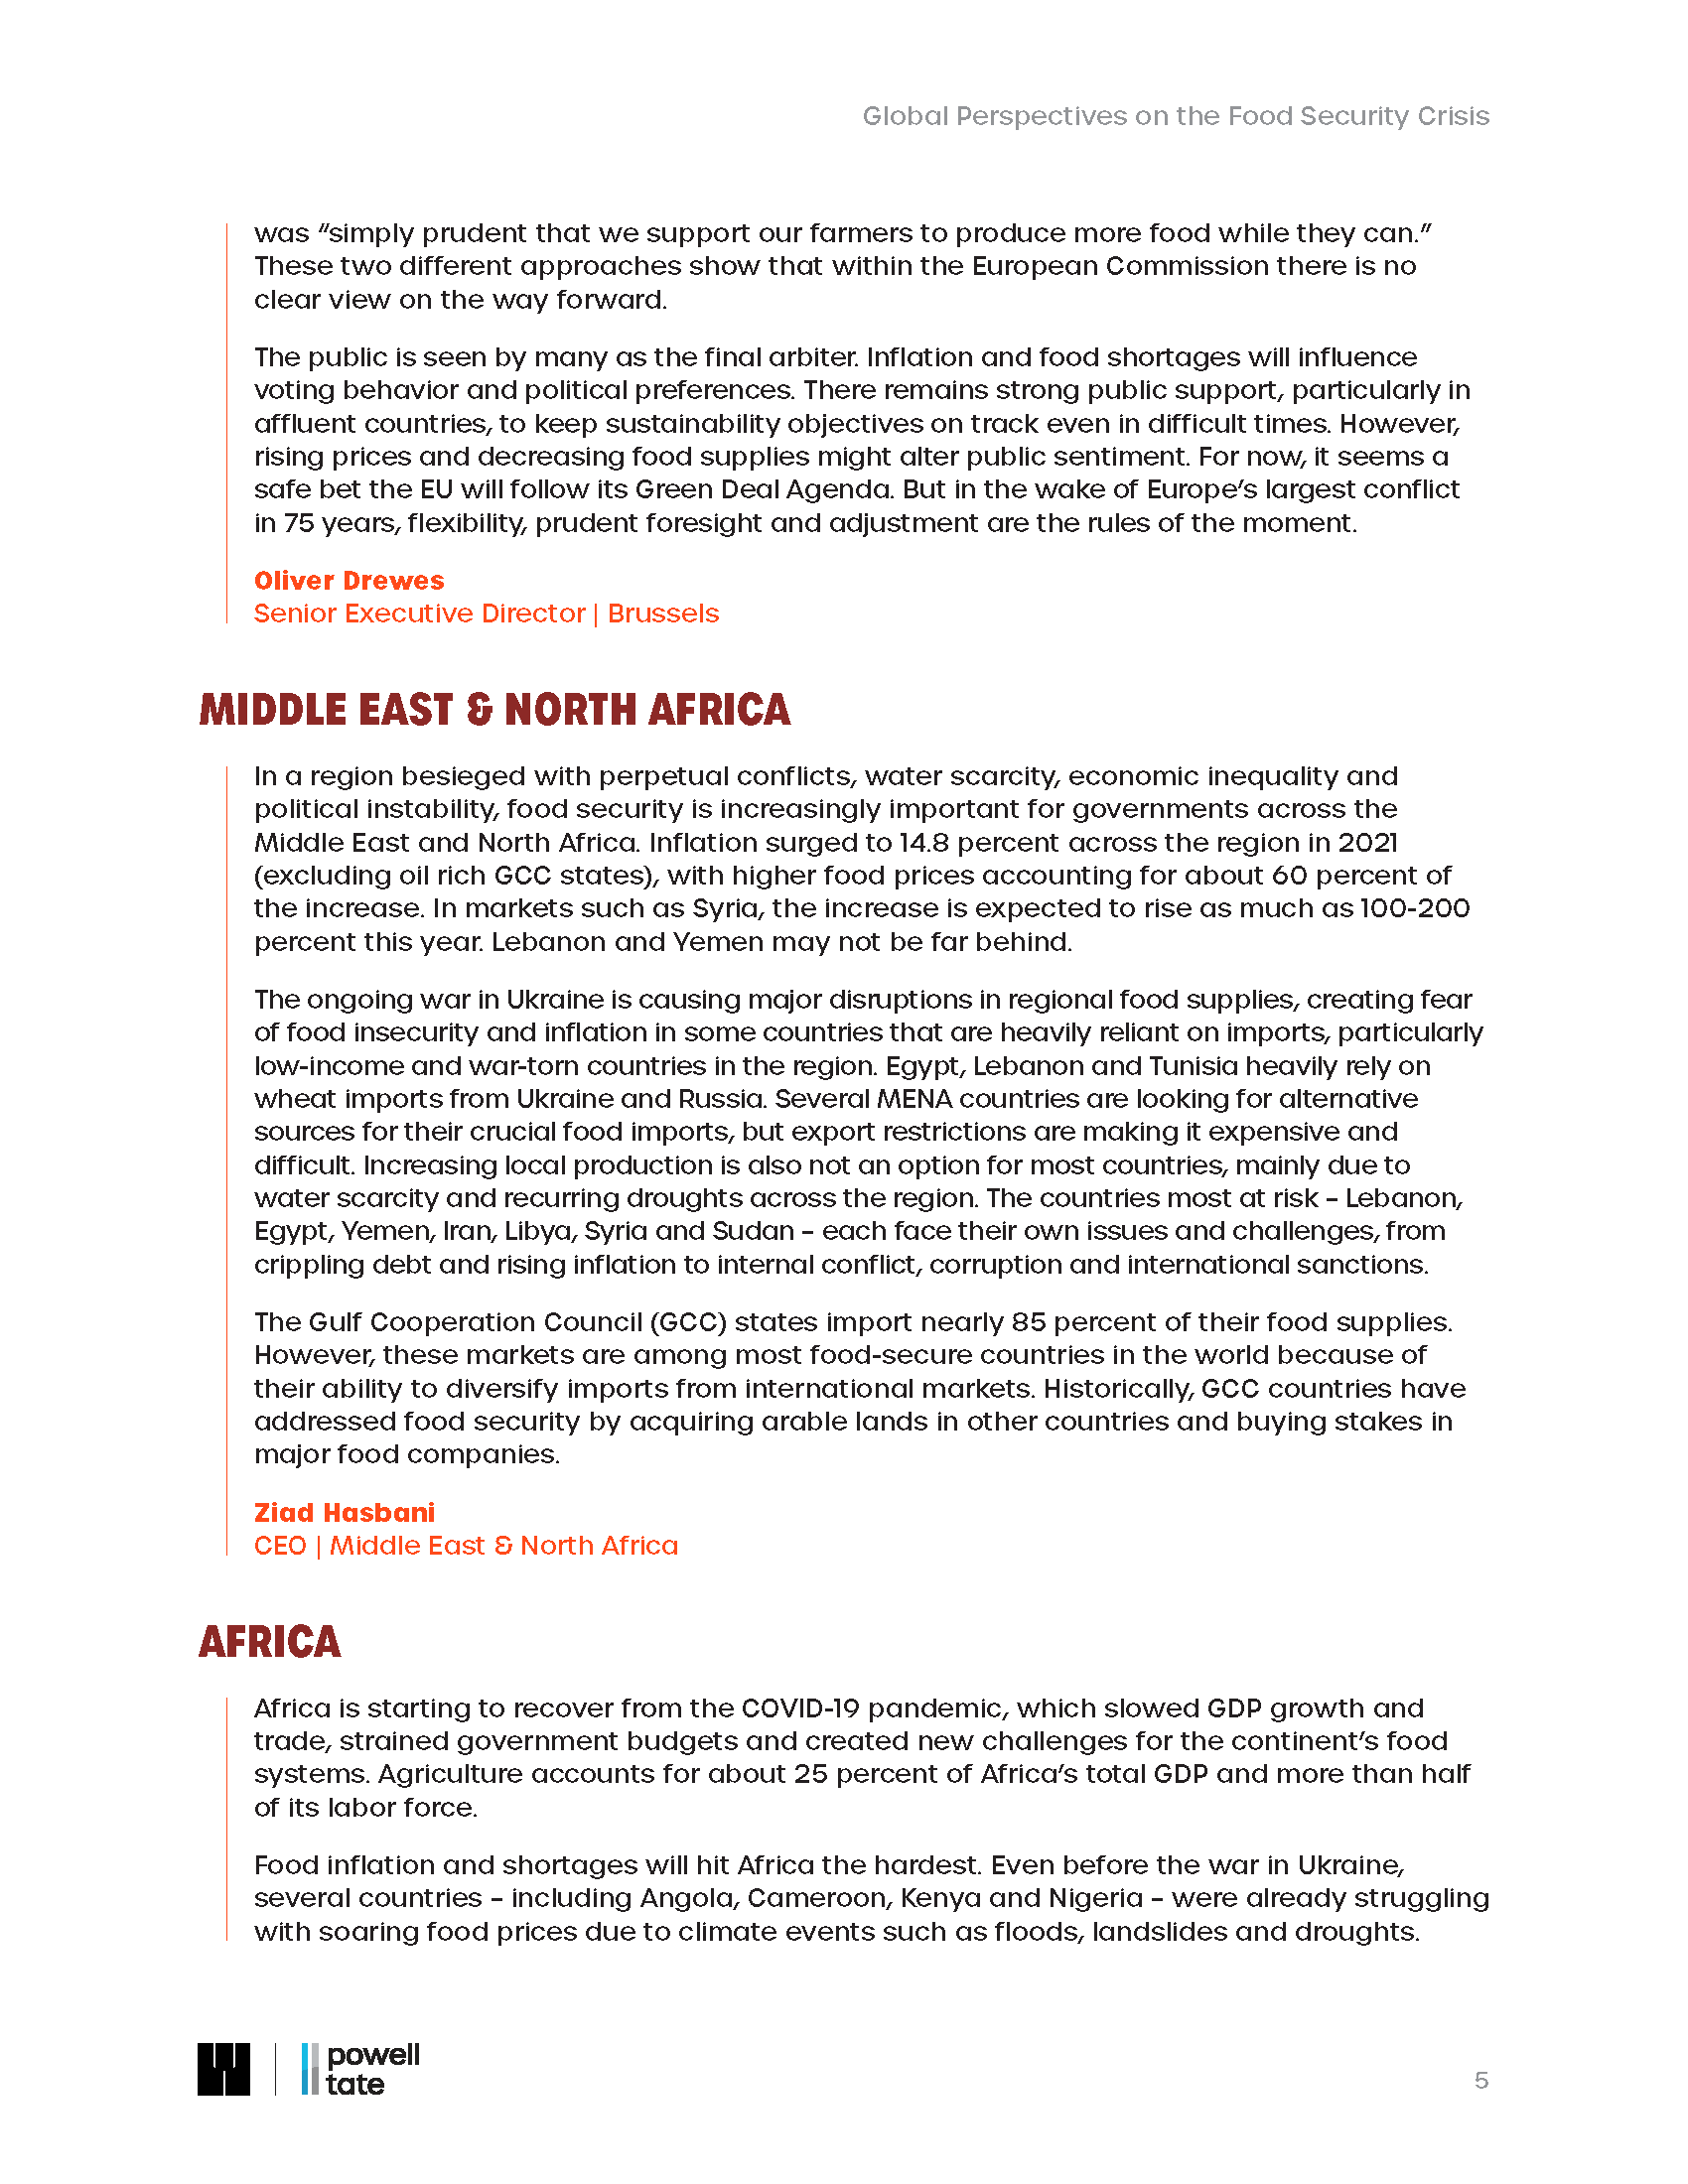 Global-Perspectives-On-The-Food-Security-Crisis_Page_5